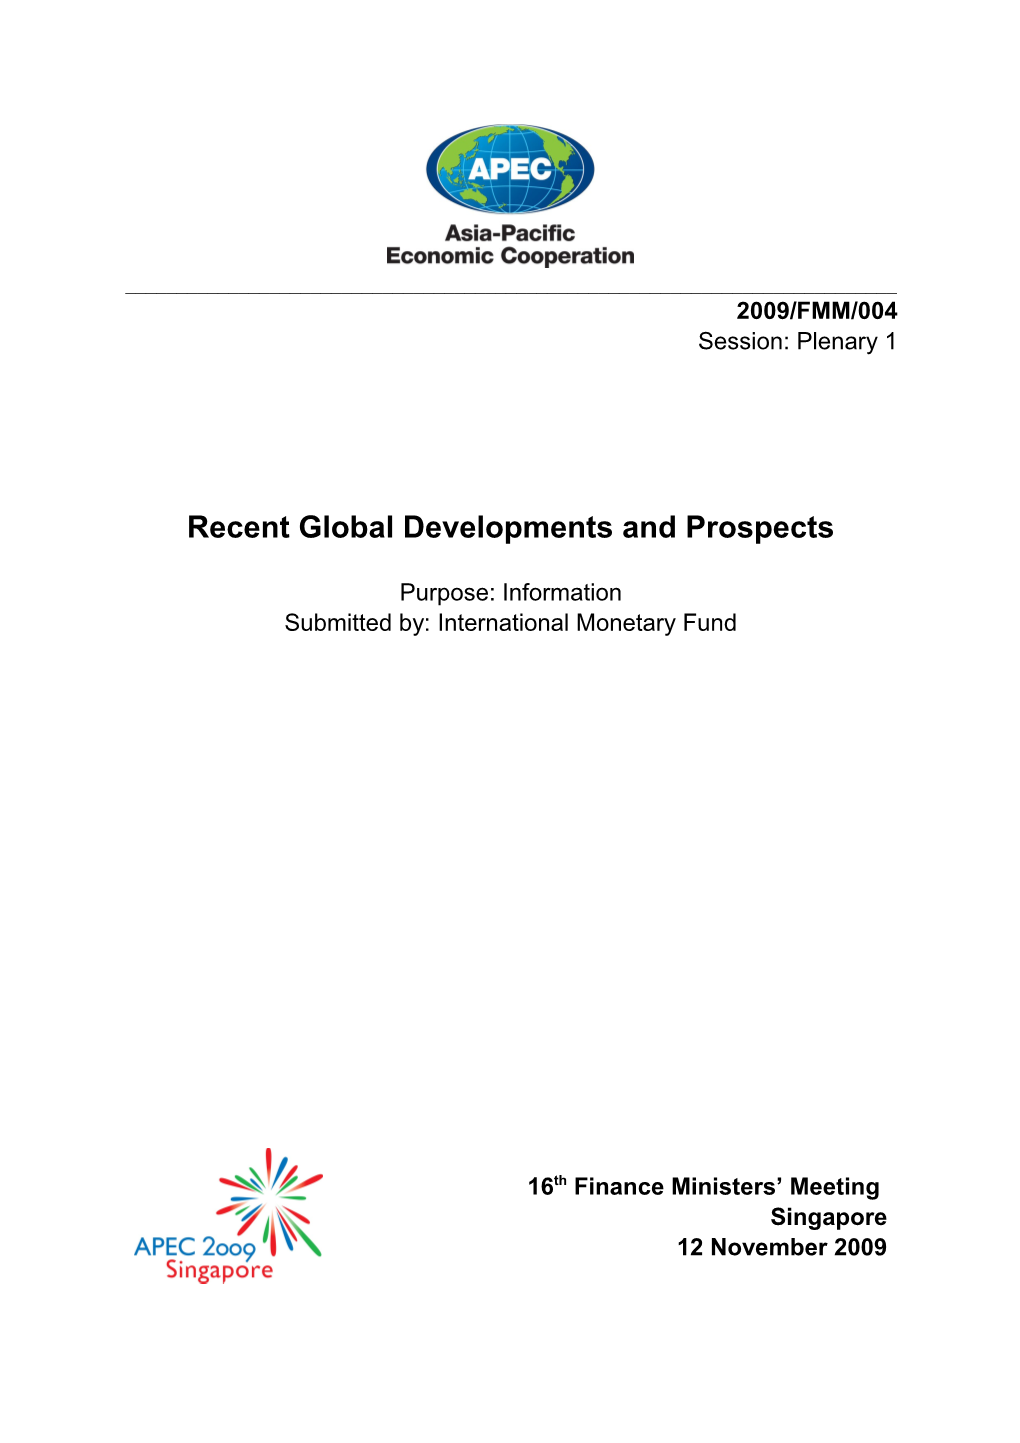 Recent Global Developments and Prospects